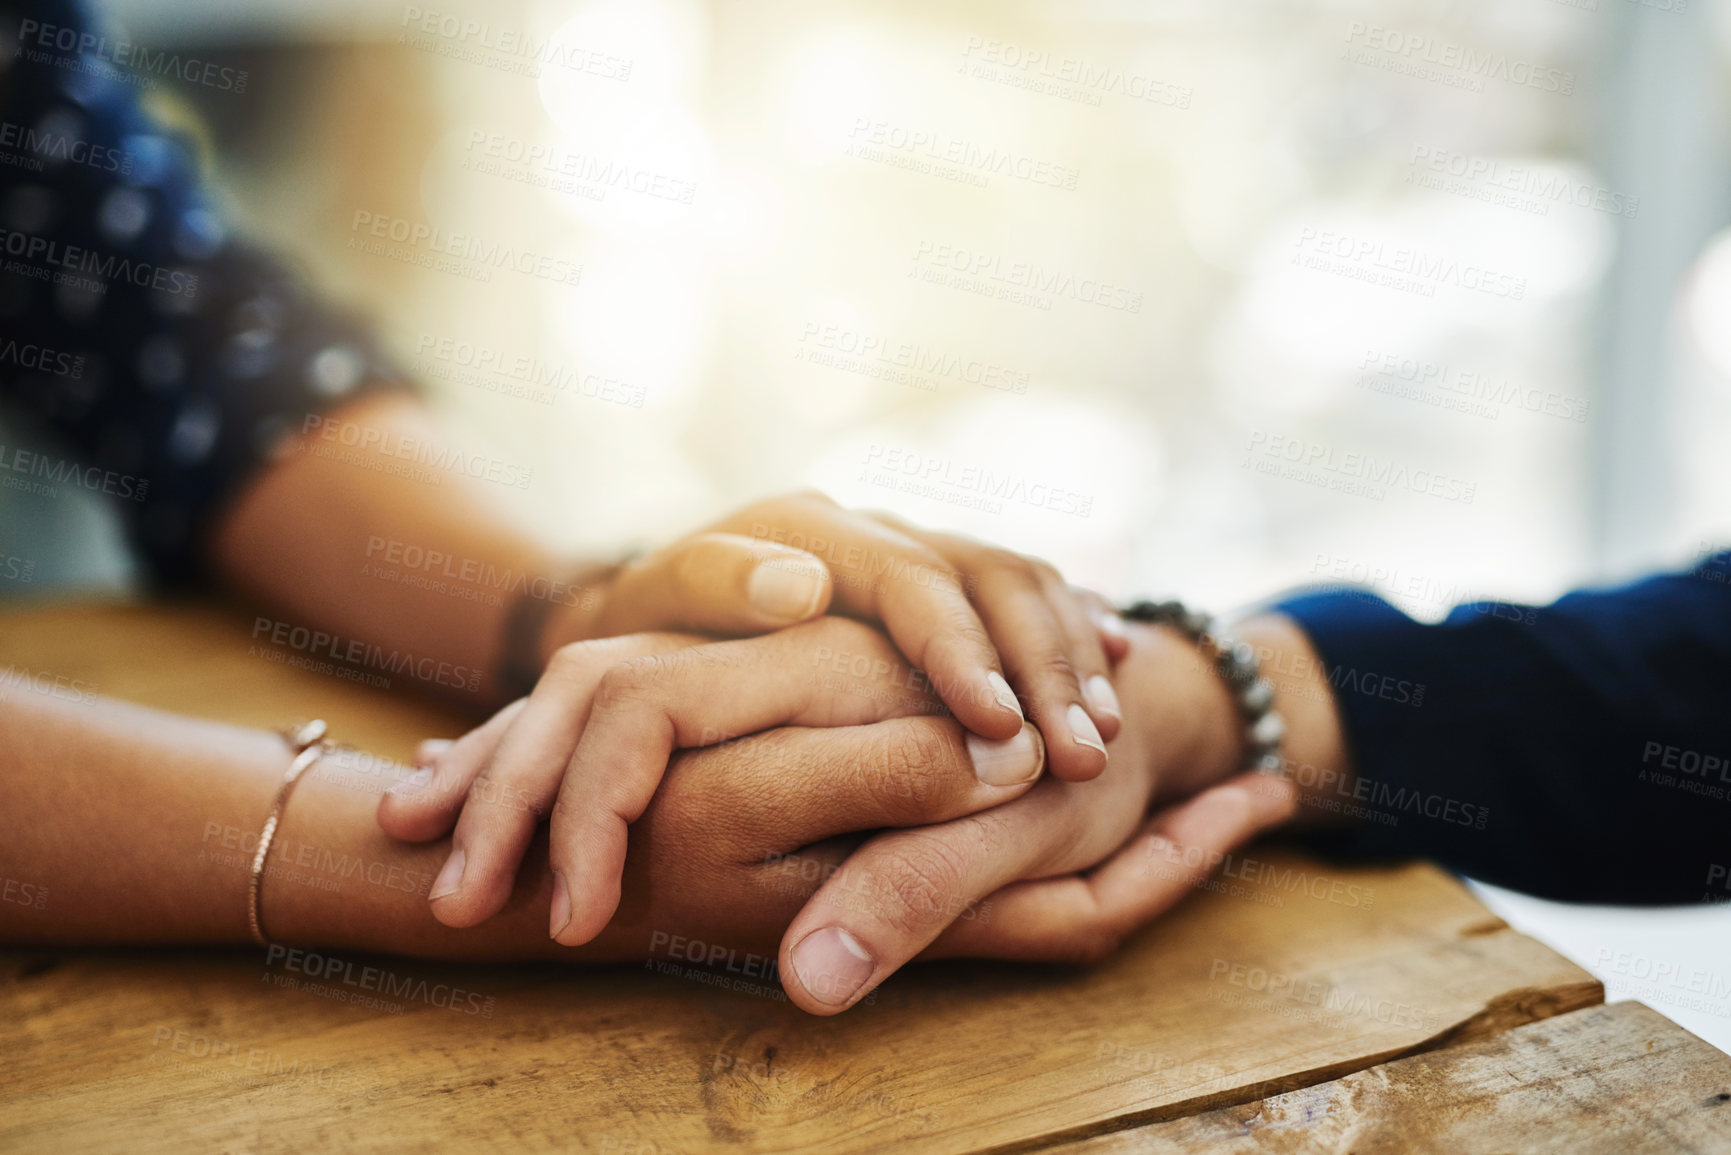 Buy stock photo Holding hands, support and comfort of two people talking through a difficult problem. Closeup of friends showing care and love through a hard time, consoling each other and bonding